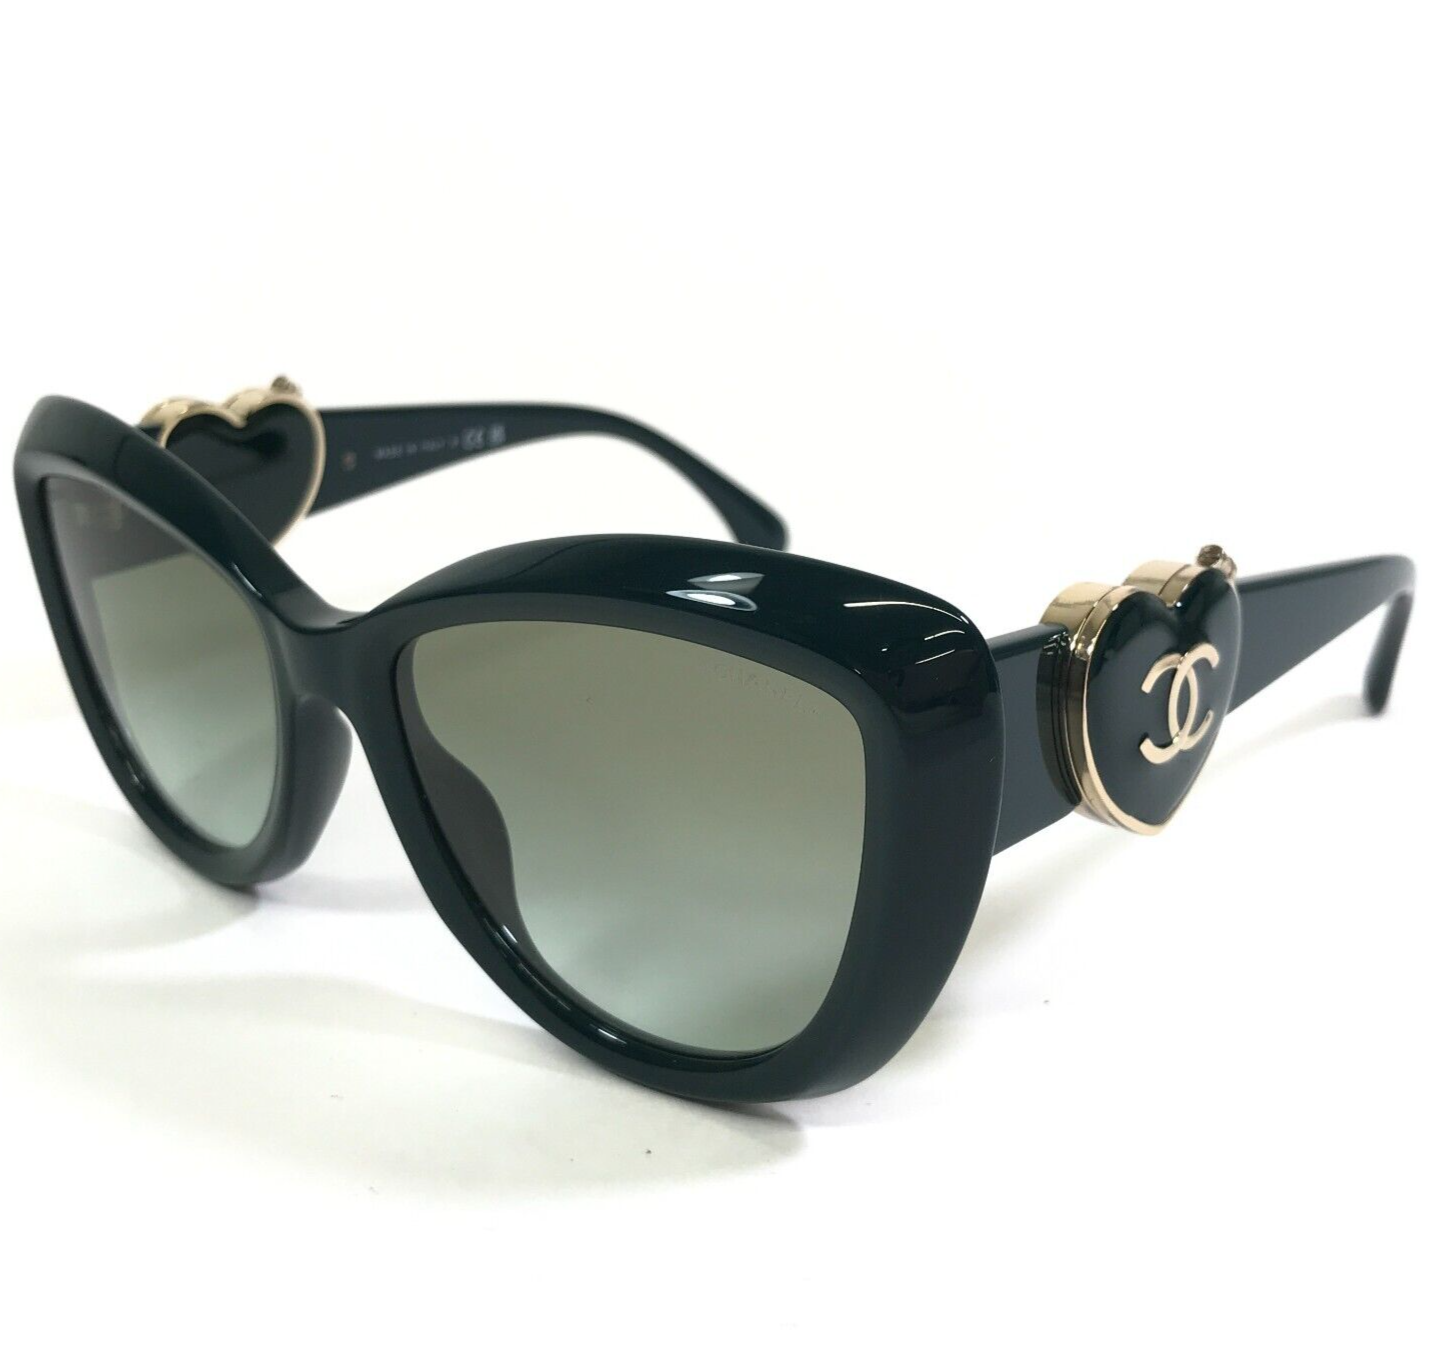 Primary image for CHANEL Sunglasses 5517-A c.1459/S3 Polished Green Gold Mirrored Clasp Hearts